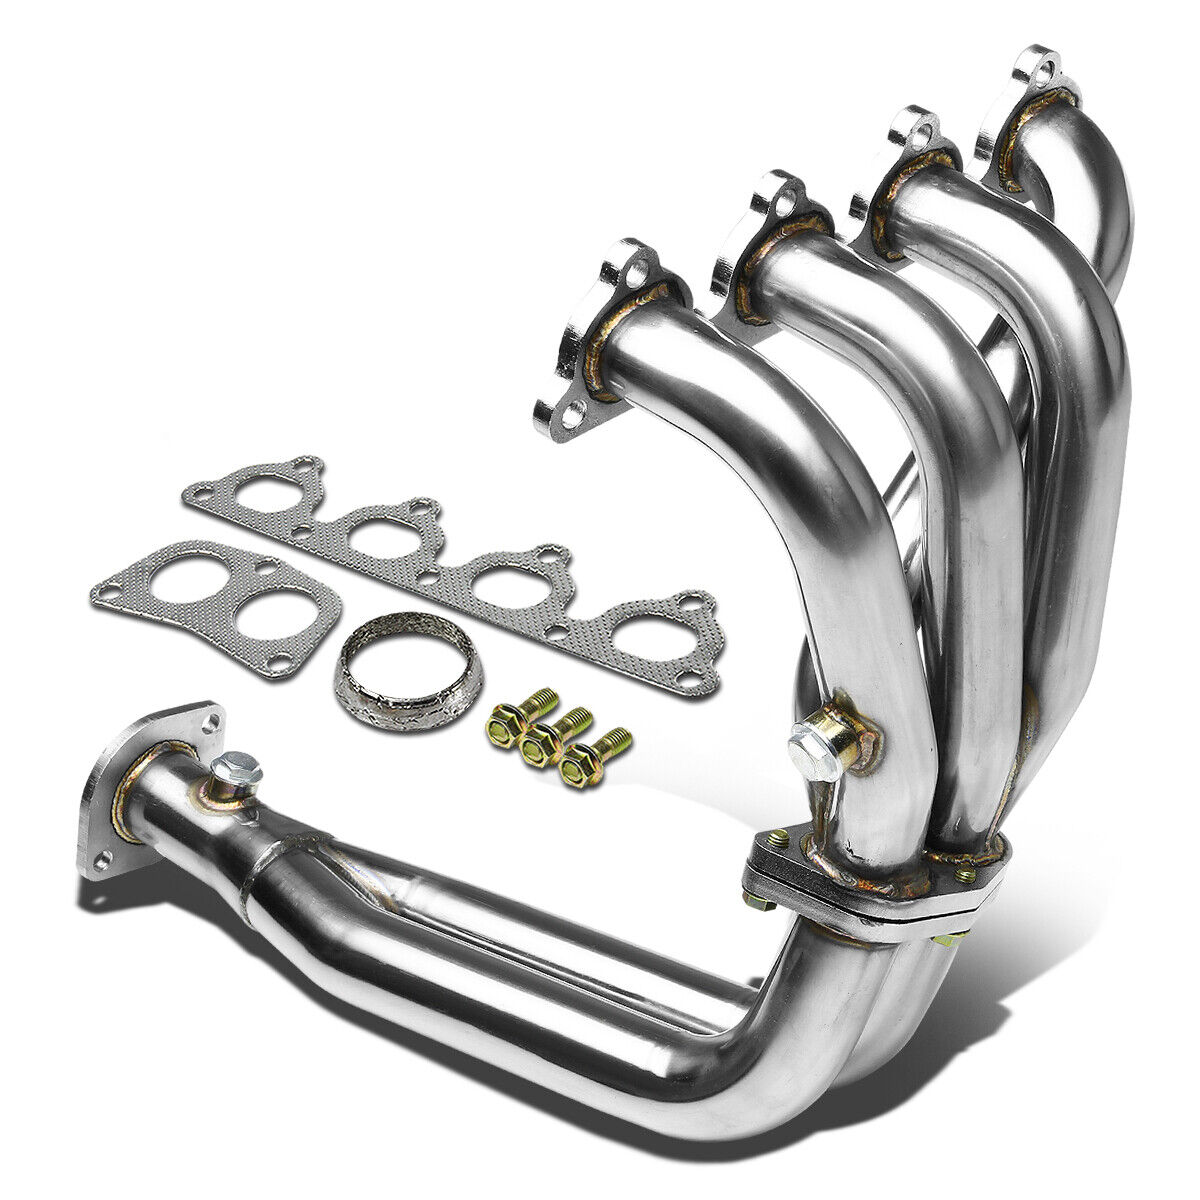 FOR 88-00 CIVIC/CRX/DEL SOL D15/D16 VTEC STAINLESS EXHAUST HEADER+GASKET+BOLTS